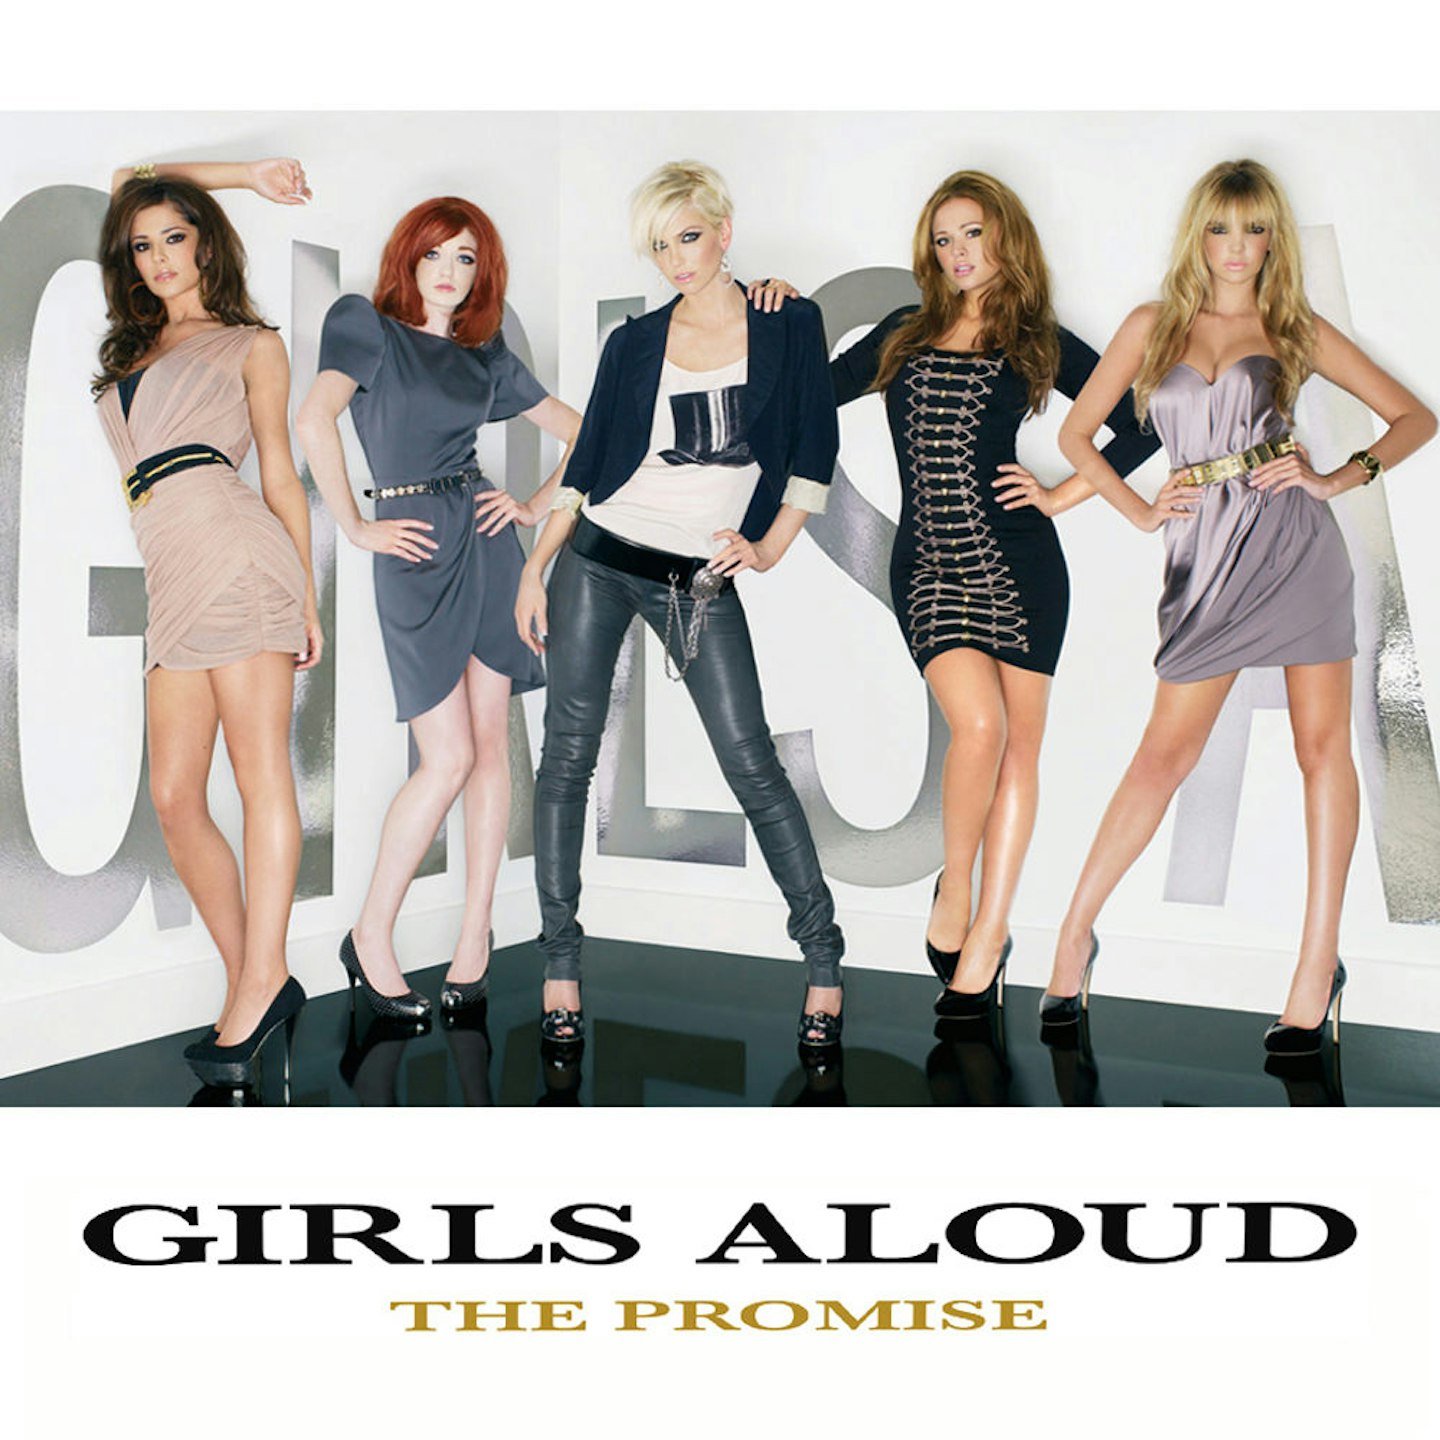 Throwback To Girls Aloud Album Covers